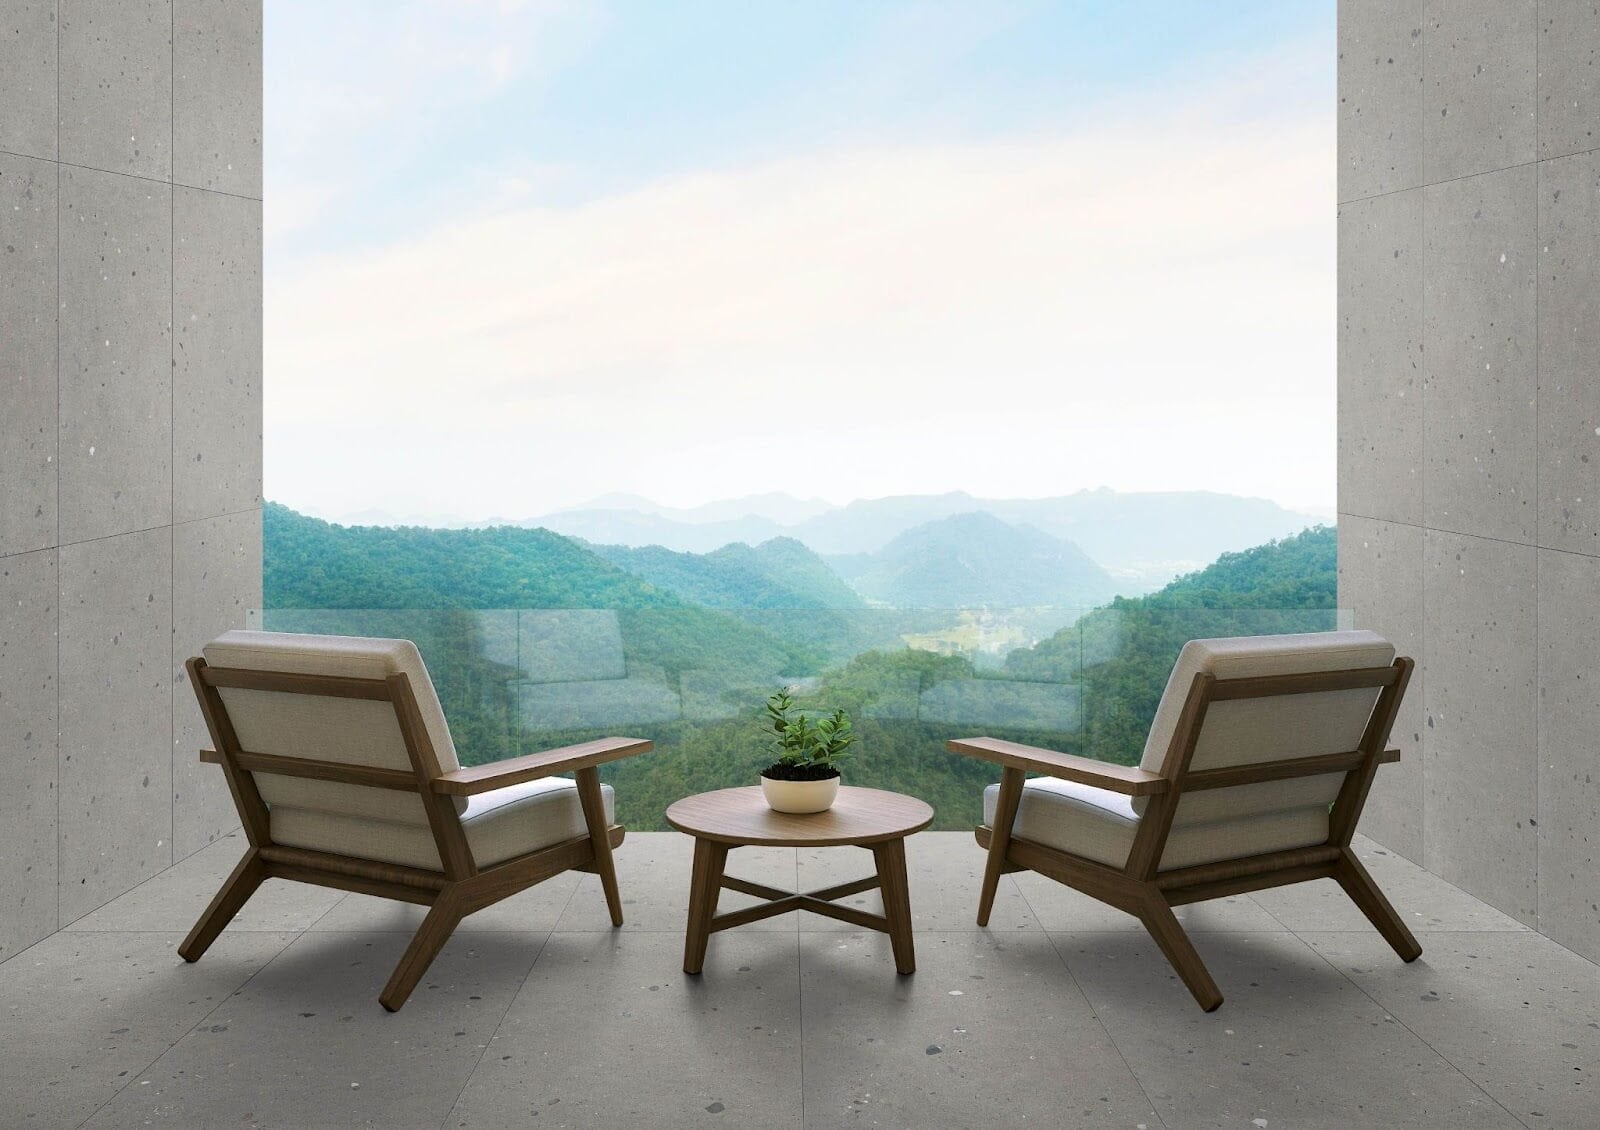 Two wooden mid-century modern chairs with a side table inbetween, facing a floor-to-ceiling window overlooking a green, scenic landscape.